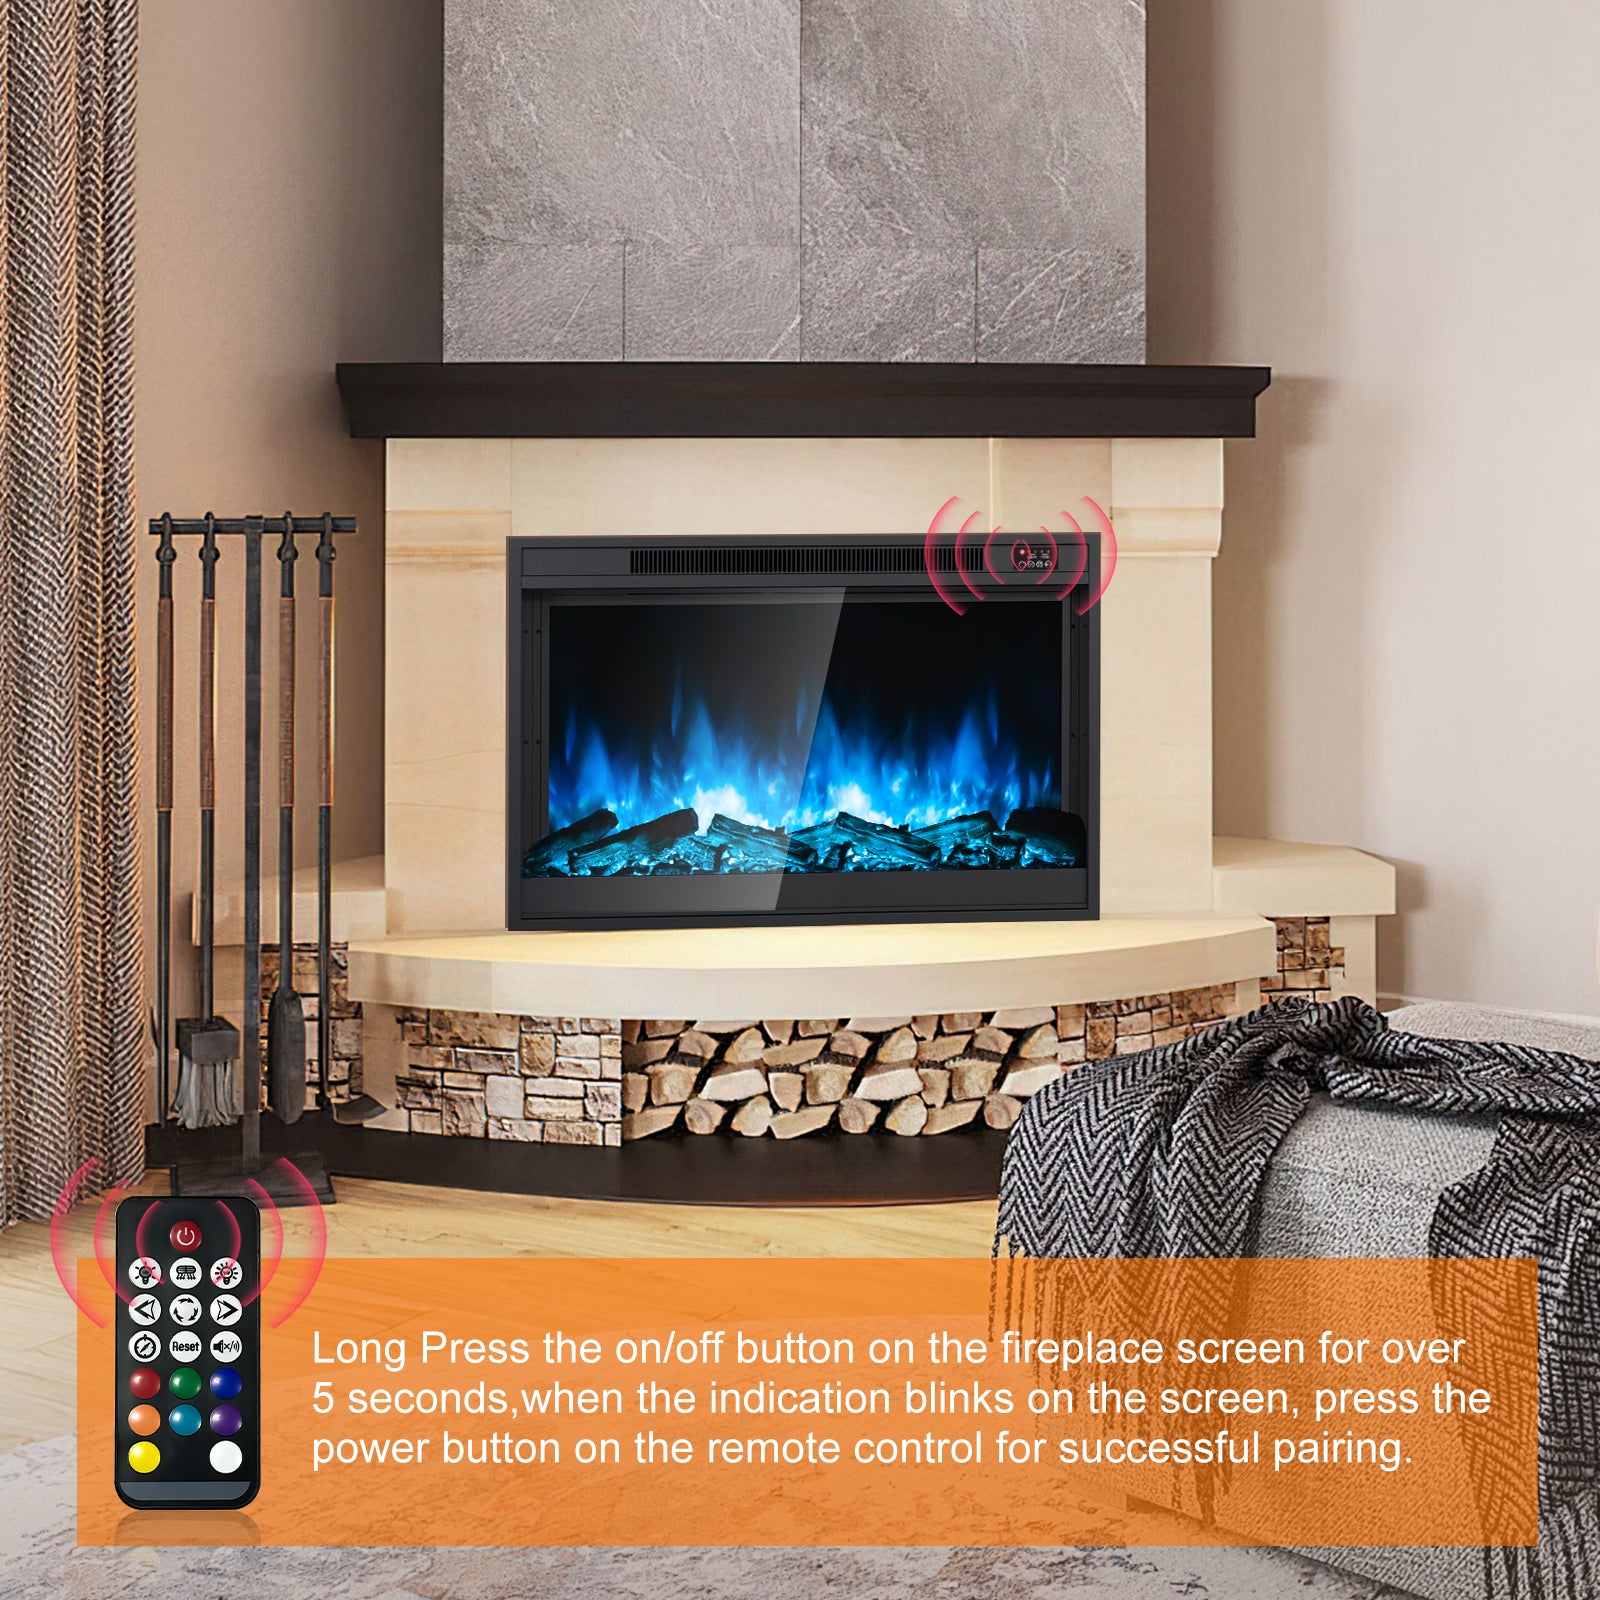 Electric Fireplace Inserts 24 inch Fire Place Eletric Fireplace Heater, Realistic LED Flame with Infrared Remote Control and Logs for Existing Living Space Room, Black